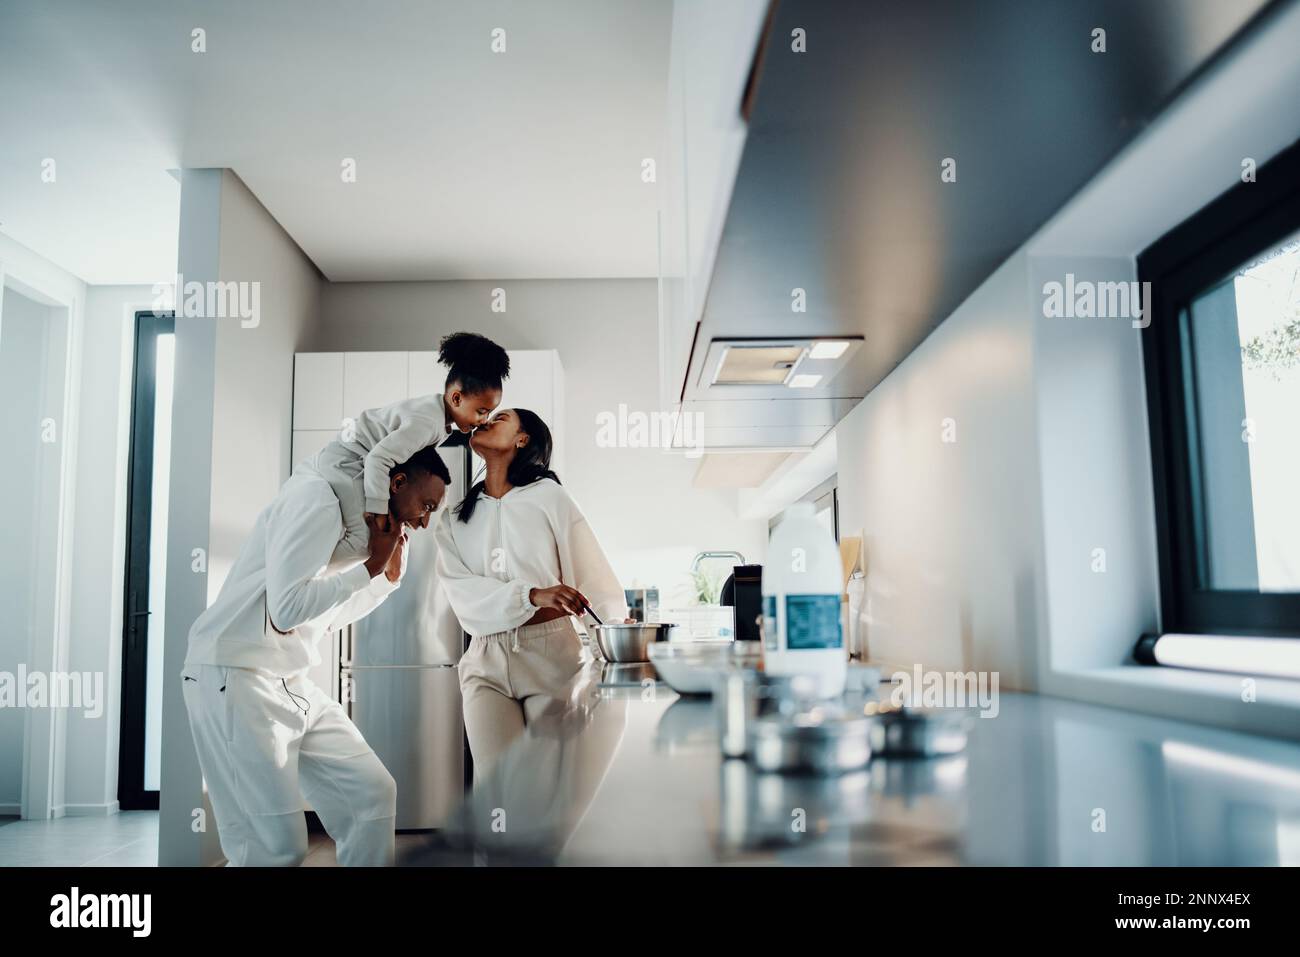 Family fun at breakfast time. Mom kisses her daughter from dad’s shoulders. Family having playful moments as mom prepares breakfast in the morning. Stock Photo